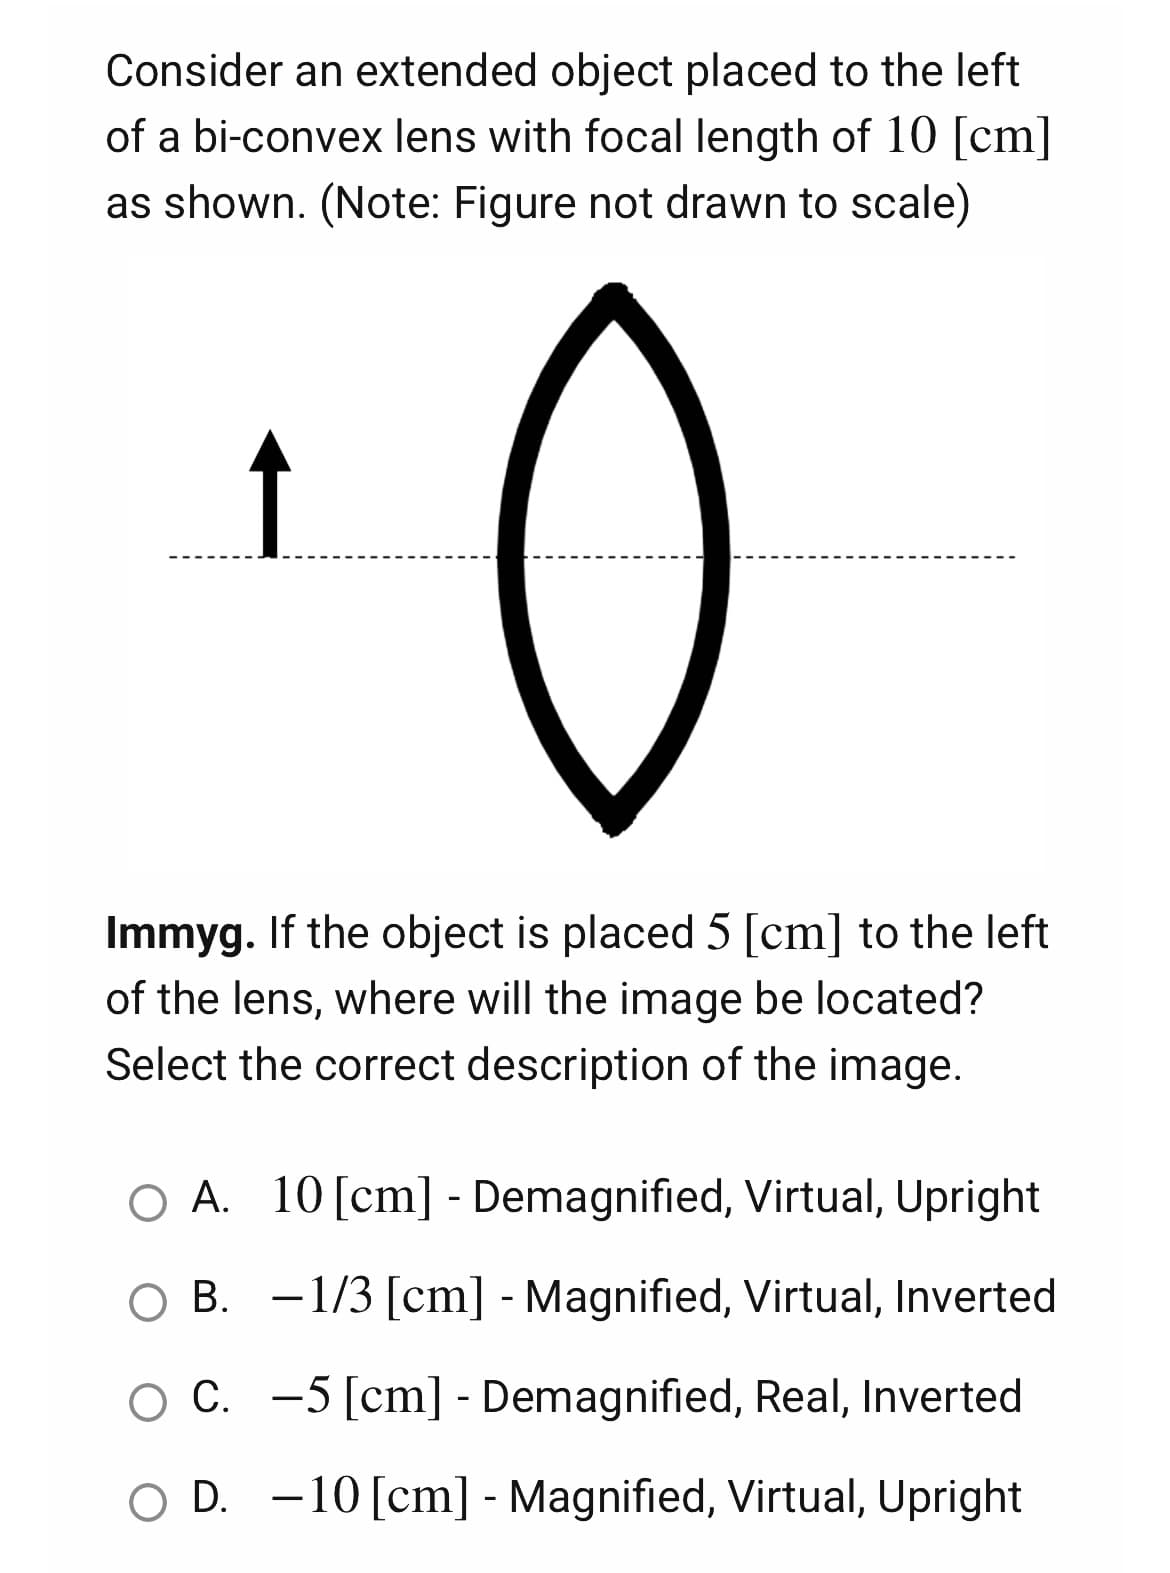 Consider an extended object placed to the left
of a bi-convex lens with focal length of 10 [cm]
as shown. (Note: Figure not drawn to scale)
↑
0
Immyg. If the object is placed 5 [cm] to the left
of the lens, where will the image be located?
Select the correct description of the image.
O A. 10 [cm] - Demagnified, Virtual, Upright
B.
−1/3 [cm] - Magnified, Virtual, Inverted
C.
5 [cm] - Demagnified, Real, Inverted
OD.
10 [cm] - Magnified, Virtual, Upright